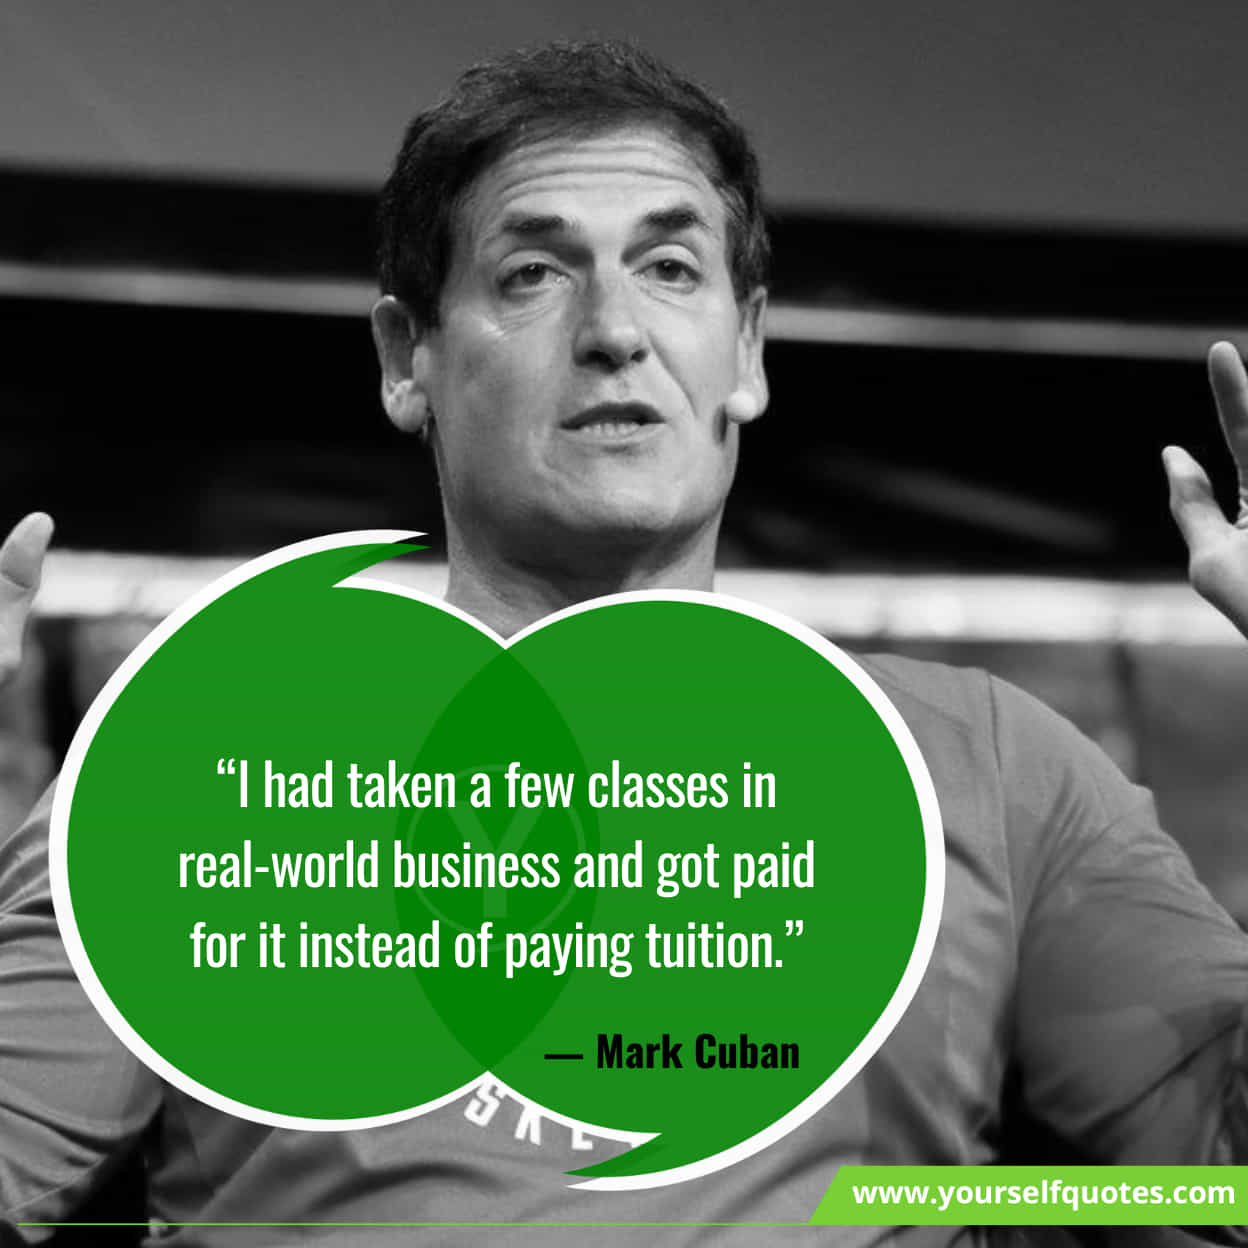 Mark Cuban quotes on investment and finance